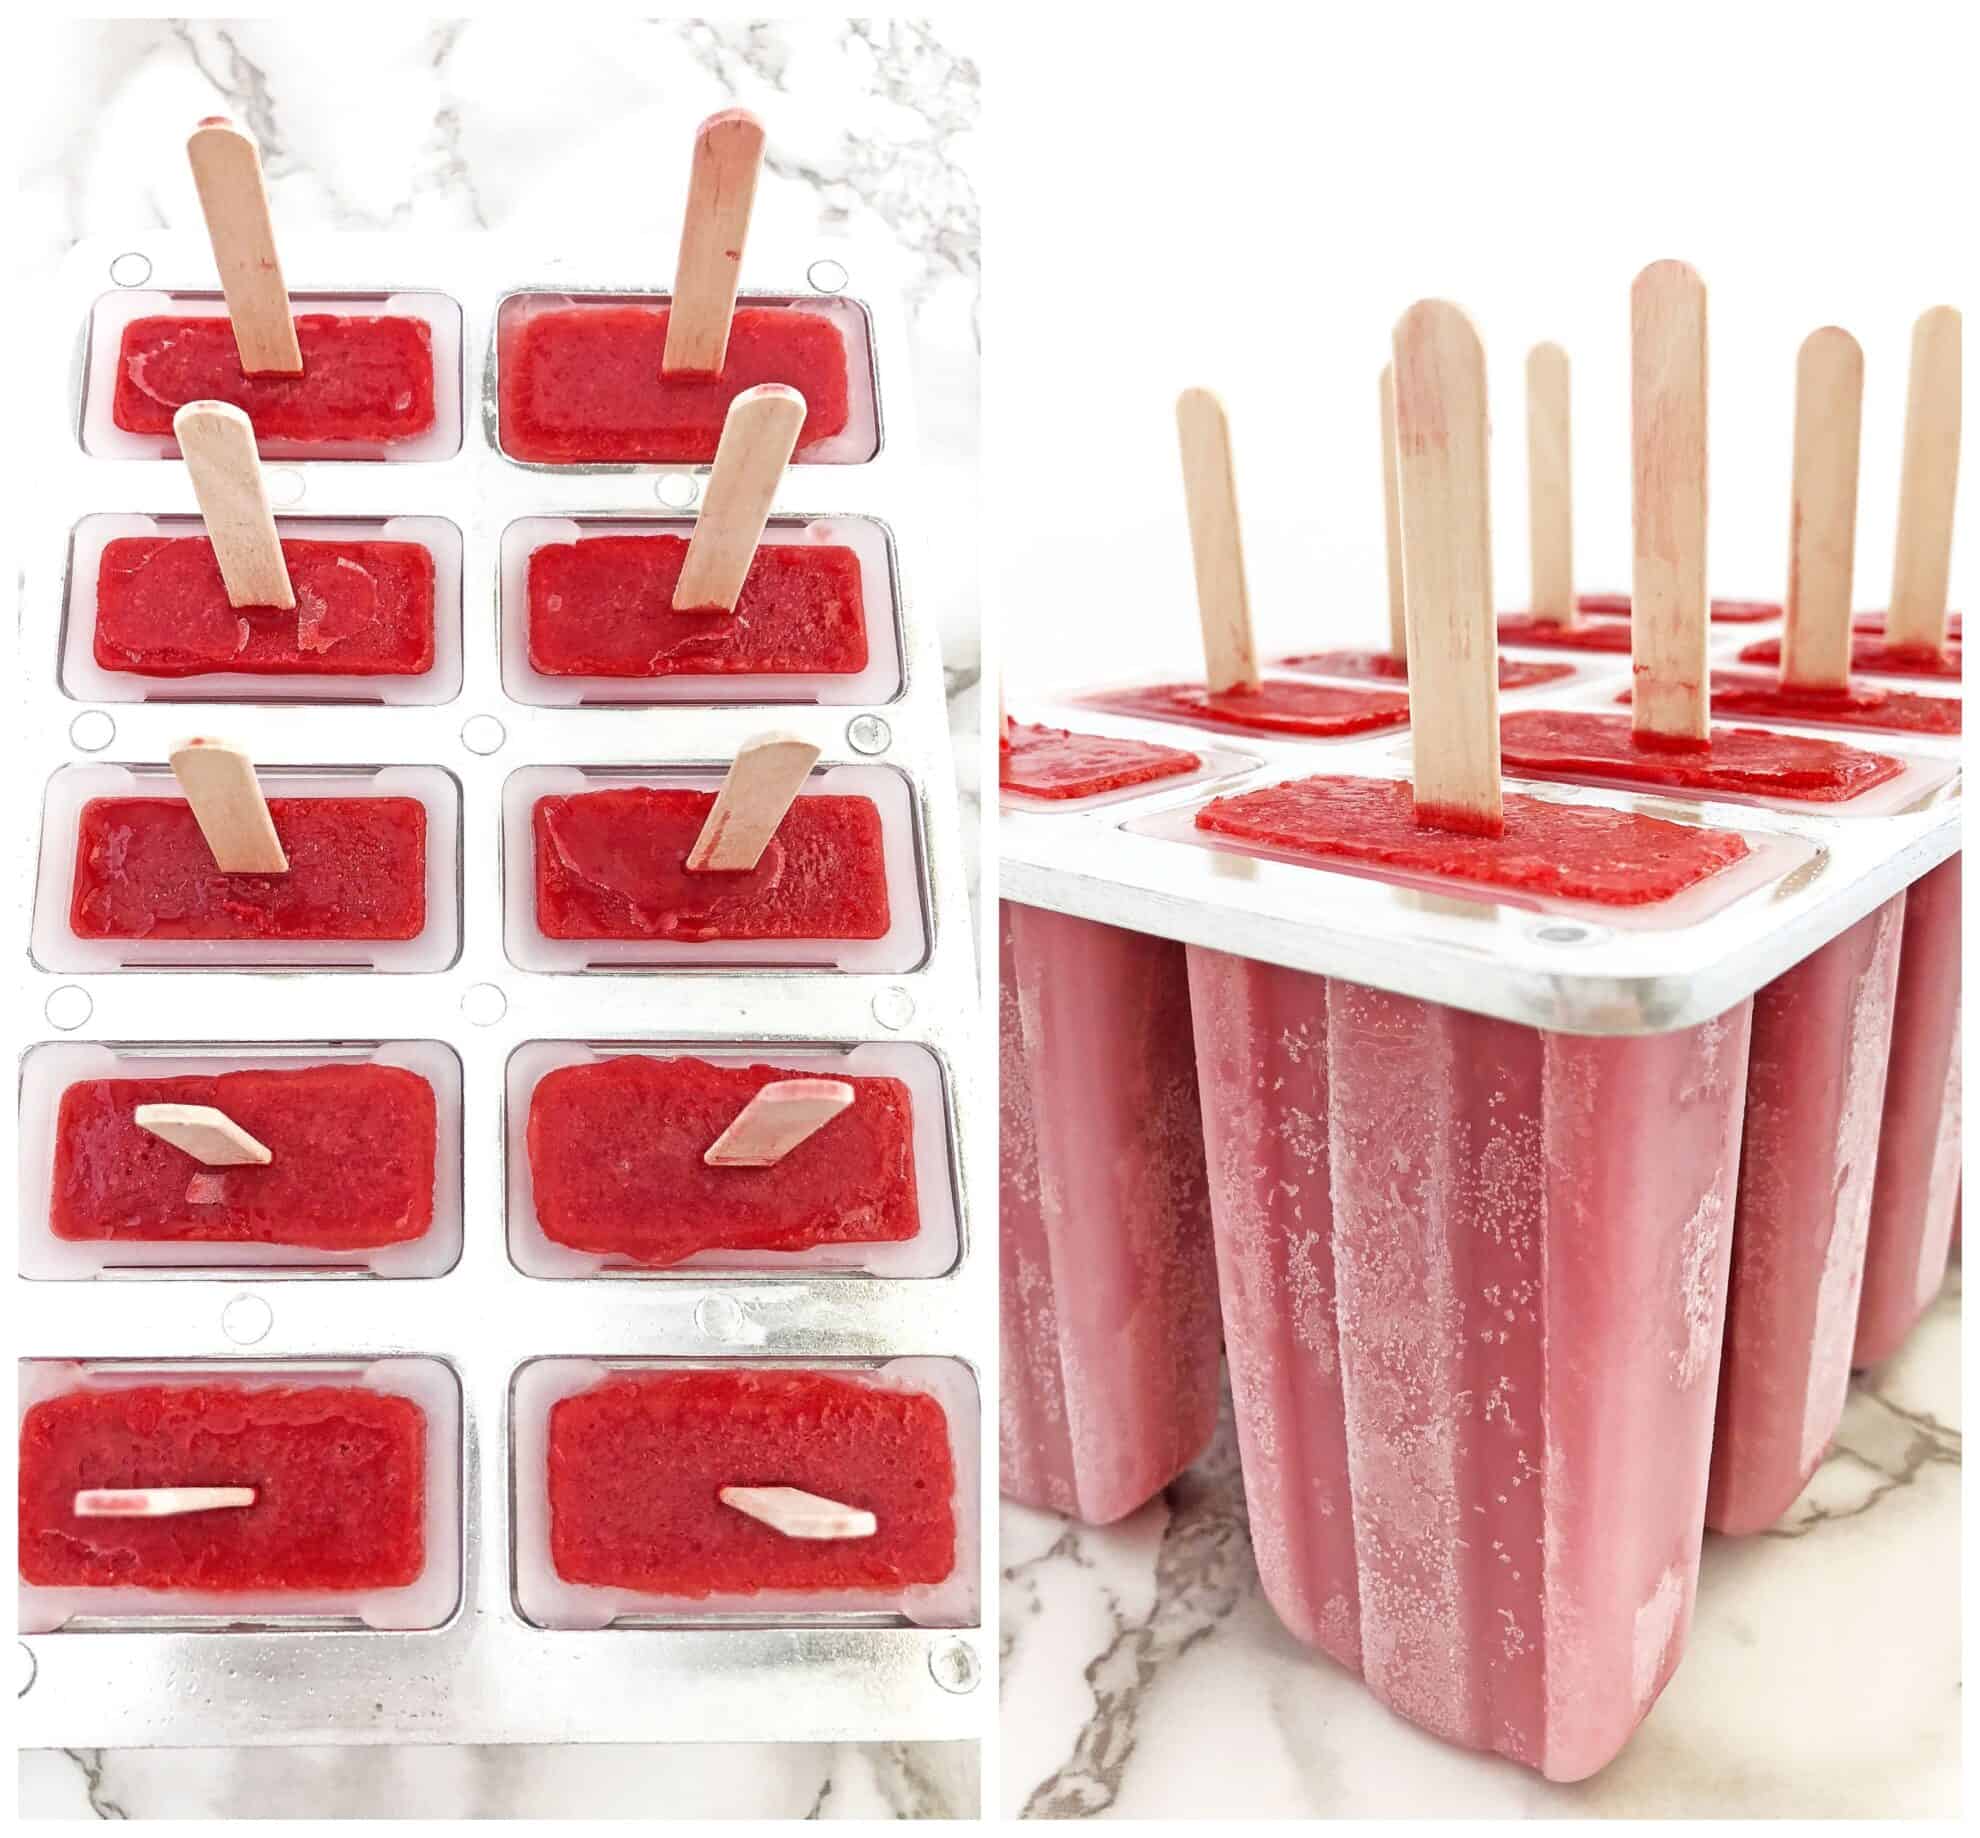 clean eating, dairy free, easy recipe, fresh strawberries, garden strawberries, gluten-free, healthy, Healthy Strawberry Popsicles Recipe, homegrown strawberries, homemade popsicles, kid-friendly, maple from Canada, organic maple syrup, popsicles, vanilla cashew milk, refined-sugar-free, vegan